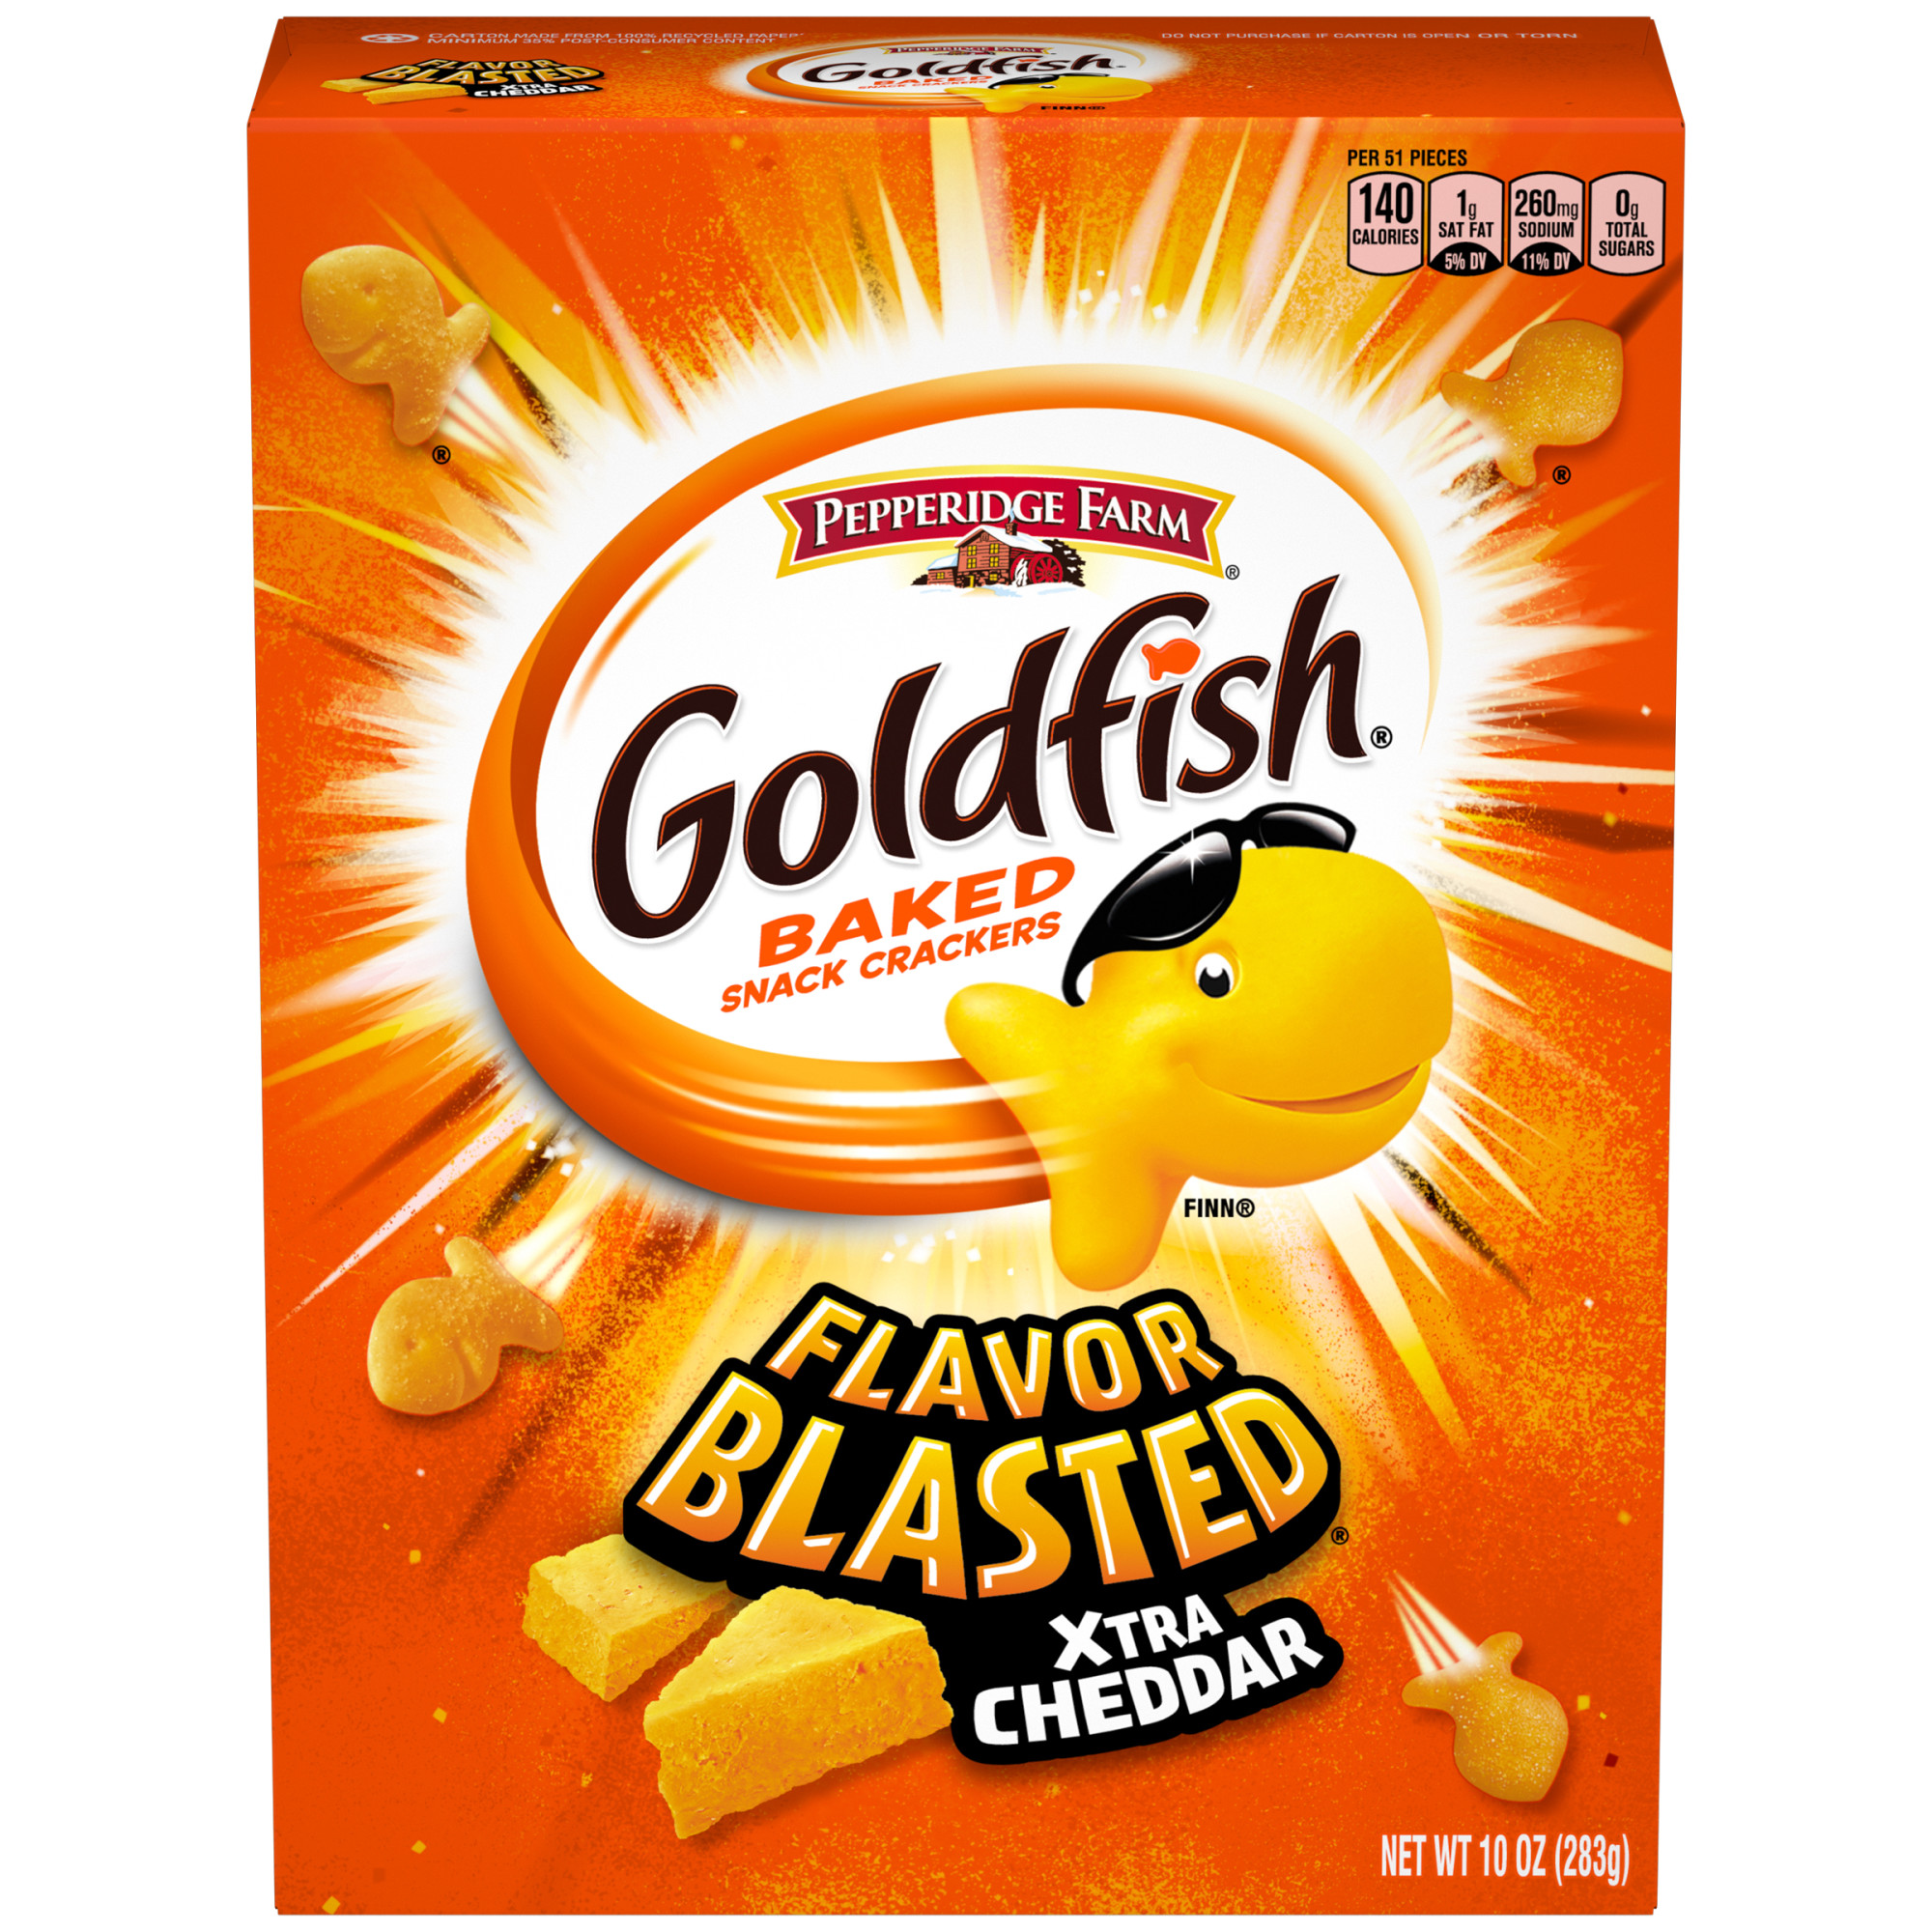 Goldfish Flavor Blasted Xtra Cheddar Snack Crackers, 10 oz box - image 1 of 12